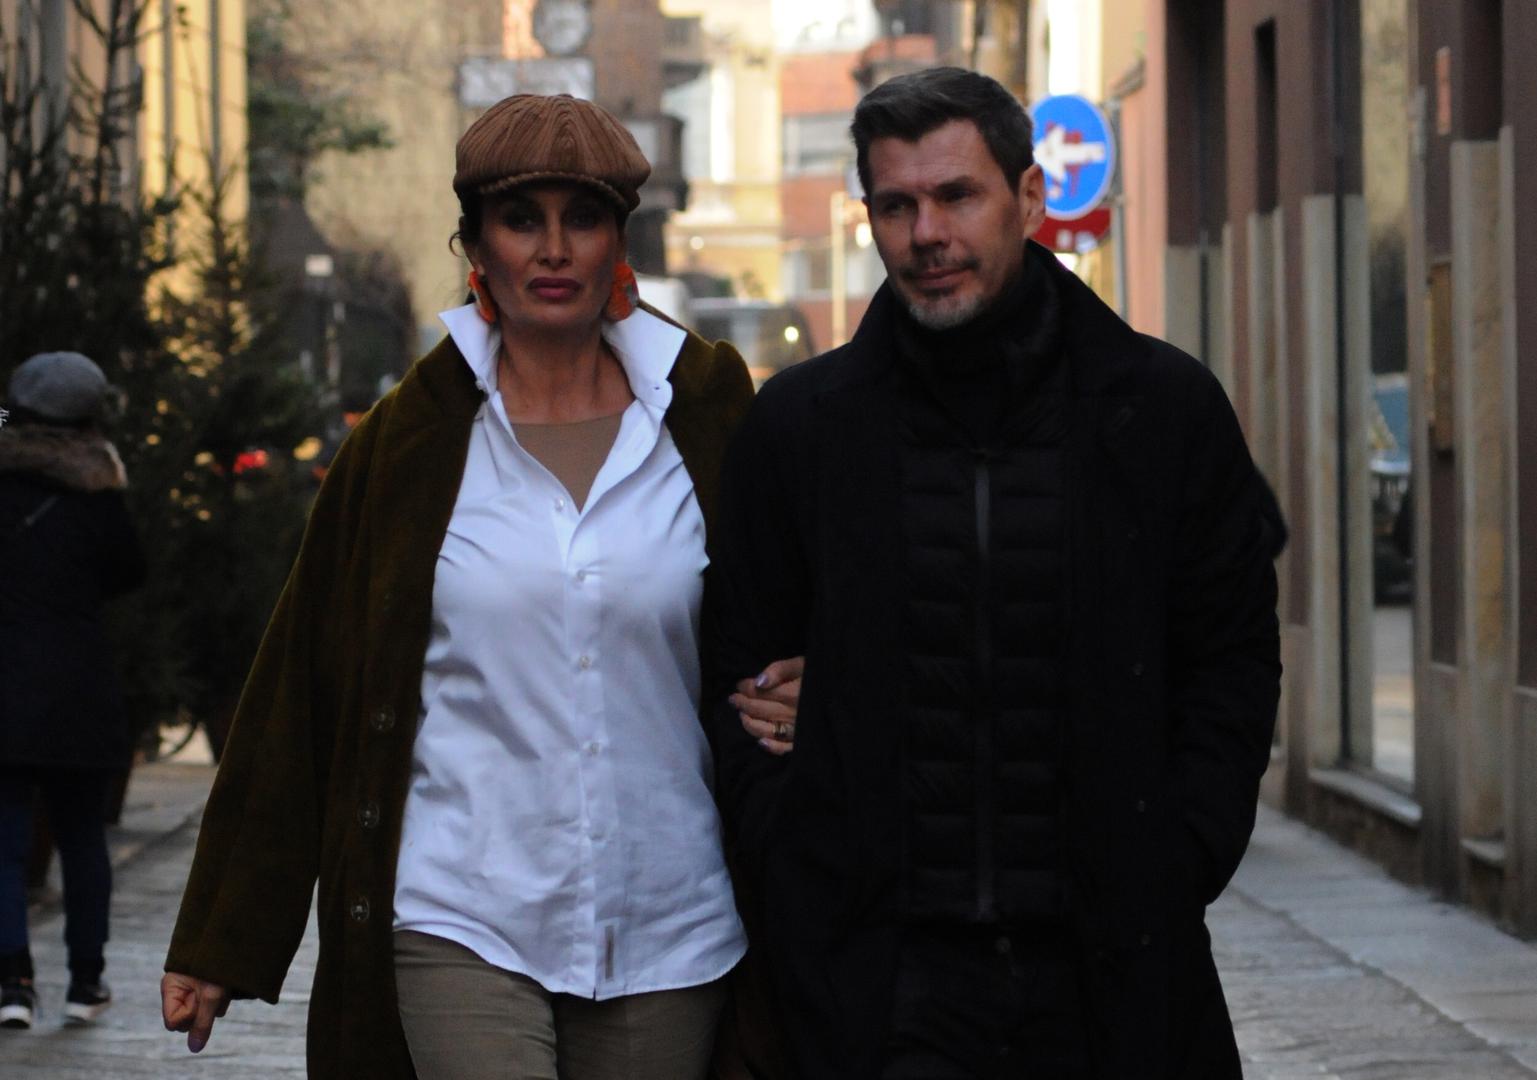 Milan, Zvonimir Boban and his wife Leonarda walking in the center Zvonimir "Zorro" Boban, manager of Milan, a former footballer of Milan and the Croatian national team, walks through the streets of the center together with his wife Leonarda. /IPA/PIXSELL